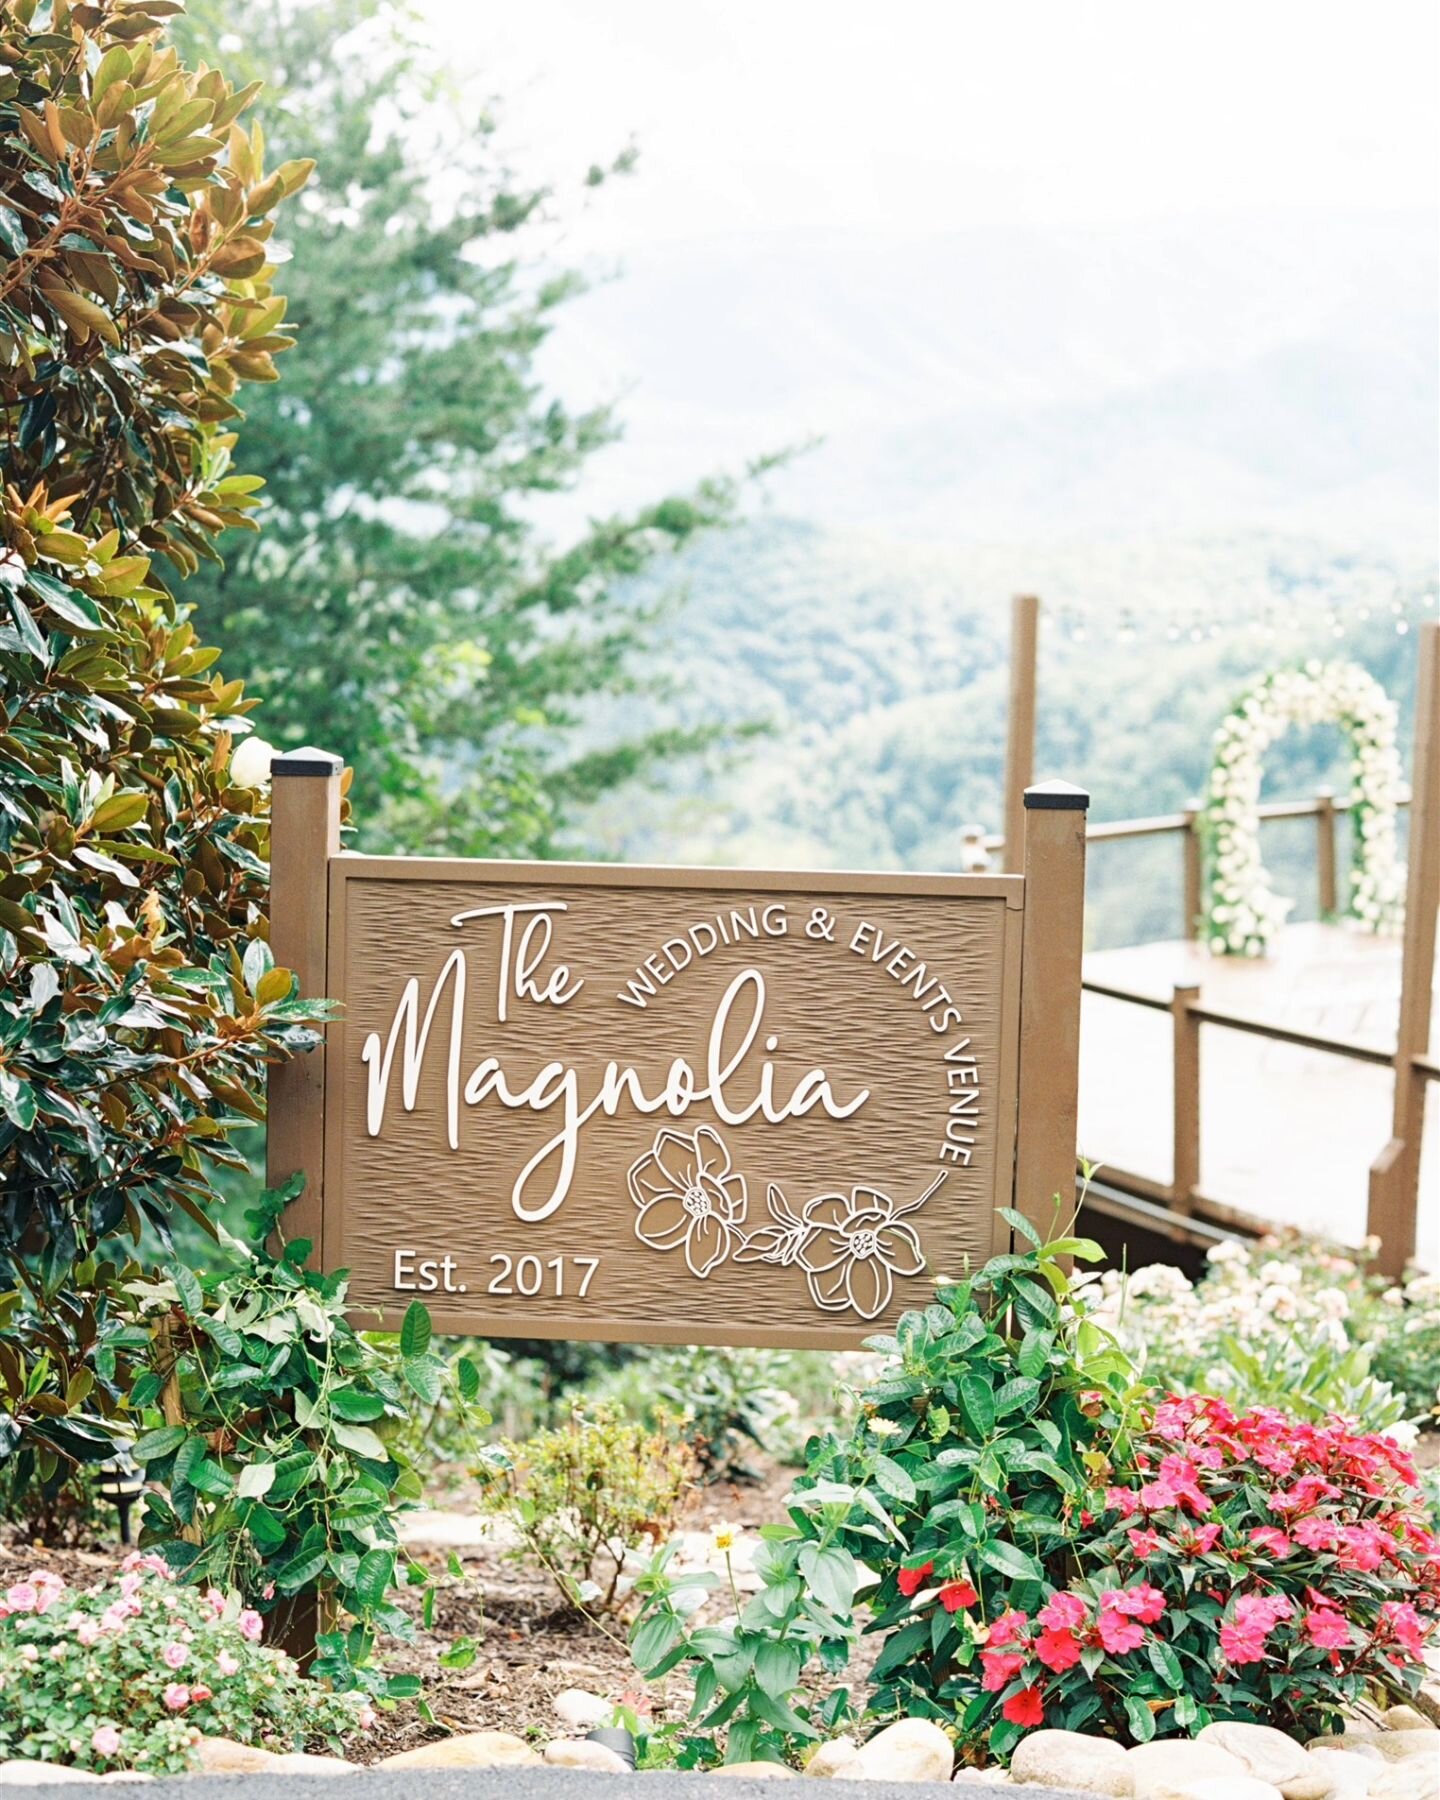 Want amazing views? The Magnolia Venue offers something you won't see anywhere else!

Planning/coordination, DJ, Videographer, Cake, Linens, Catering: @margaretclaireweddings
Officiant: chuck.oconnor
Hair and Makeup: @bangsandblush_
Bartending: @sing